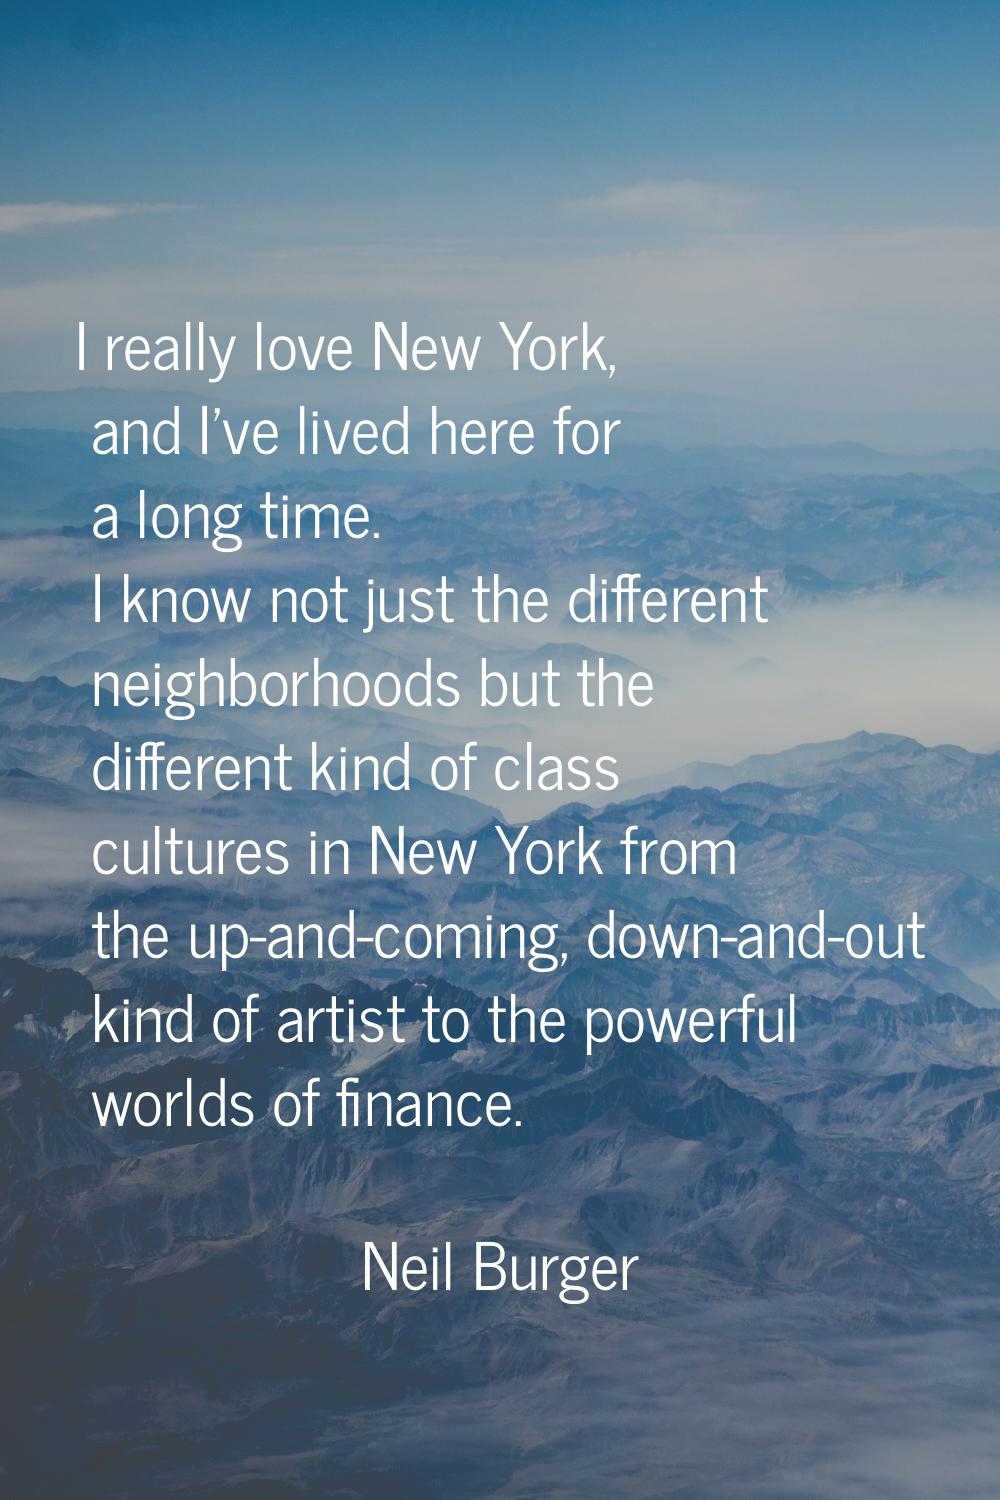 I really love New York, and I've lived here for a long time. I know not just the different neighbor